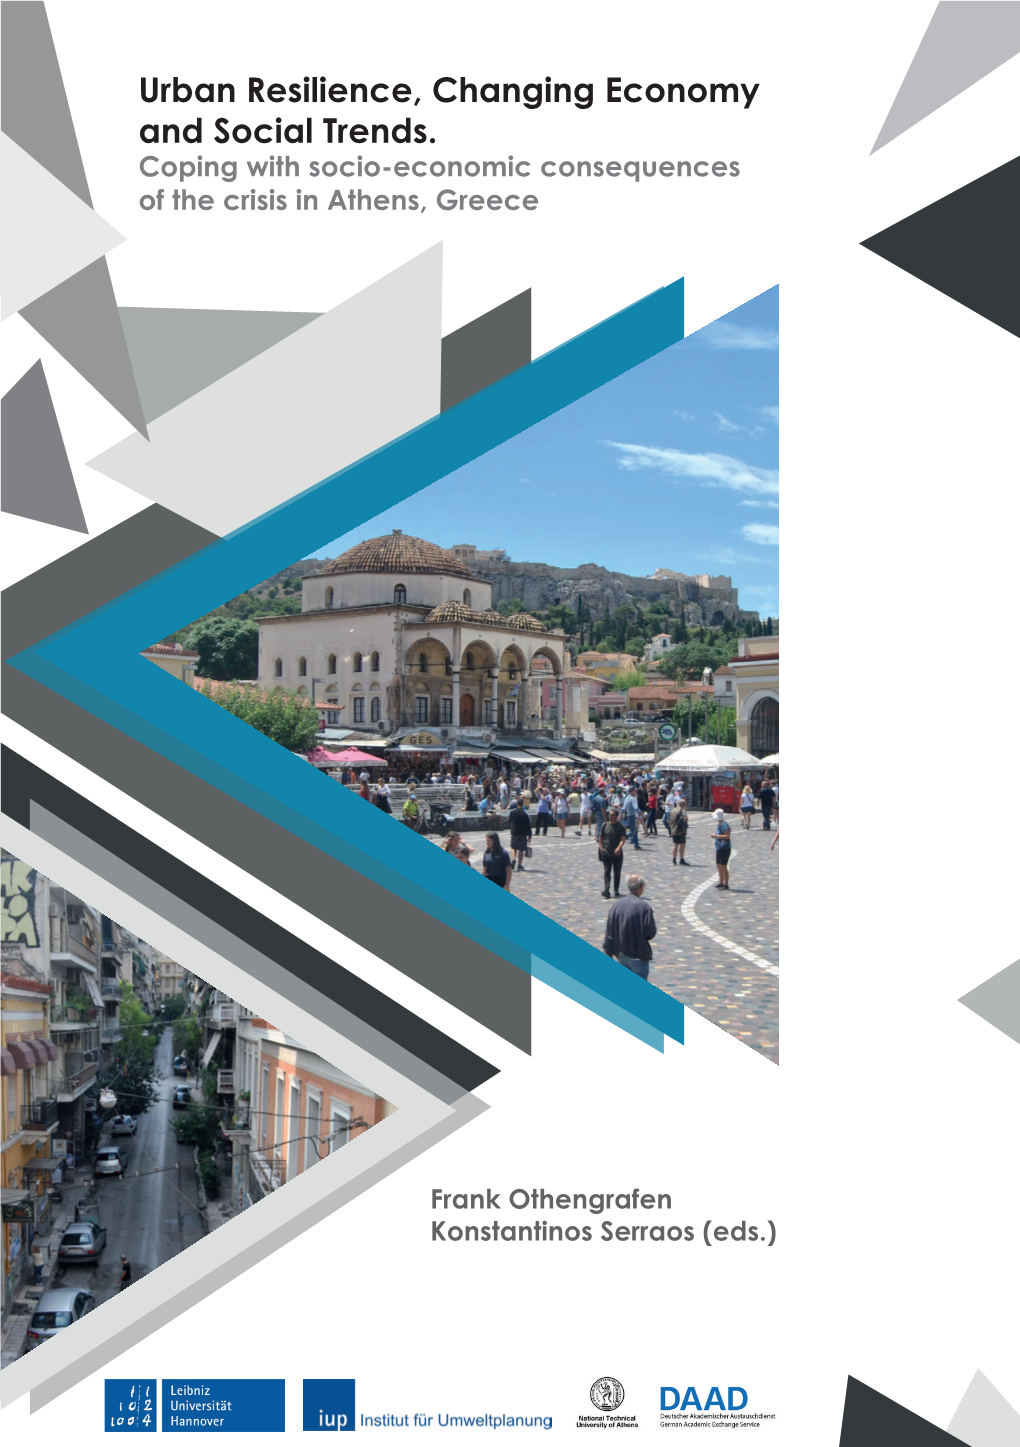 Urban Resilience, Changing Economy and Social Trends. Coping with Socio-Economic Consequences of the Crisis in Athens, Greece